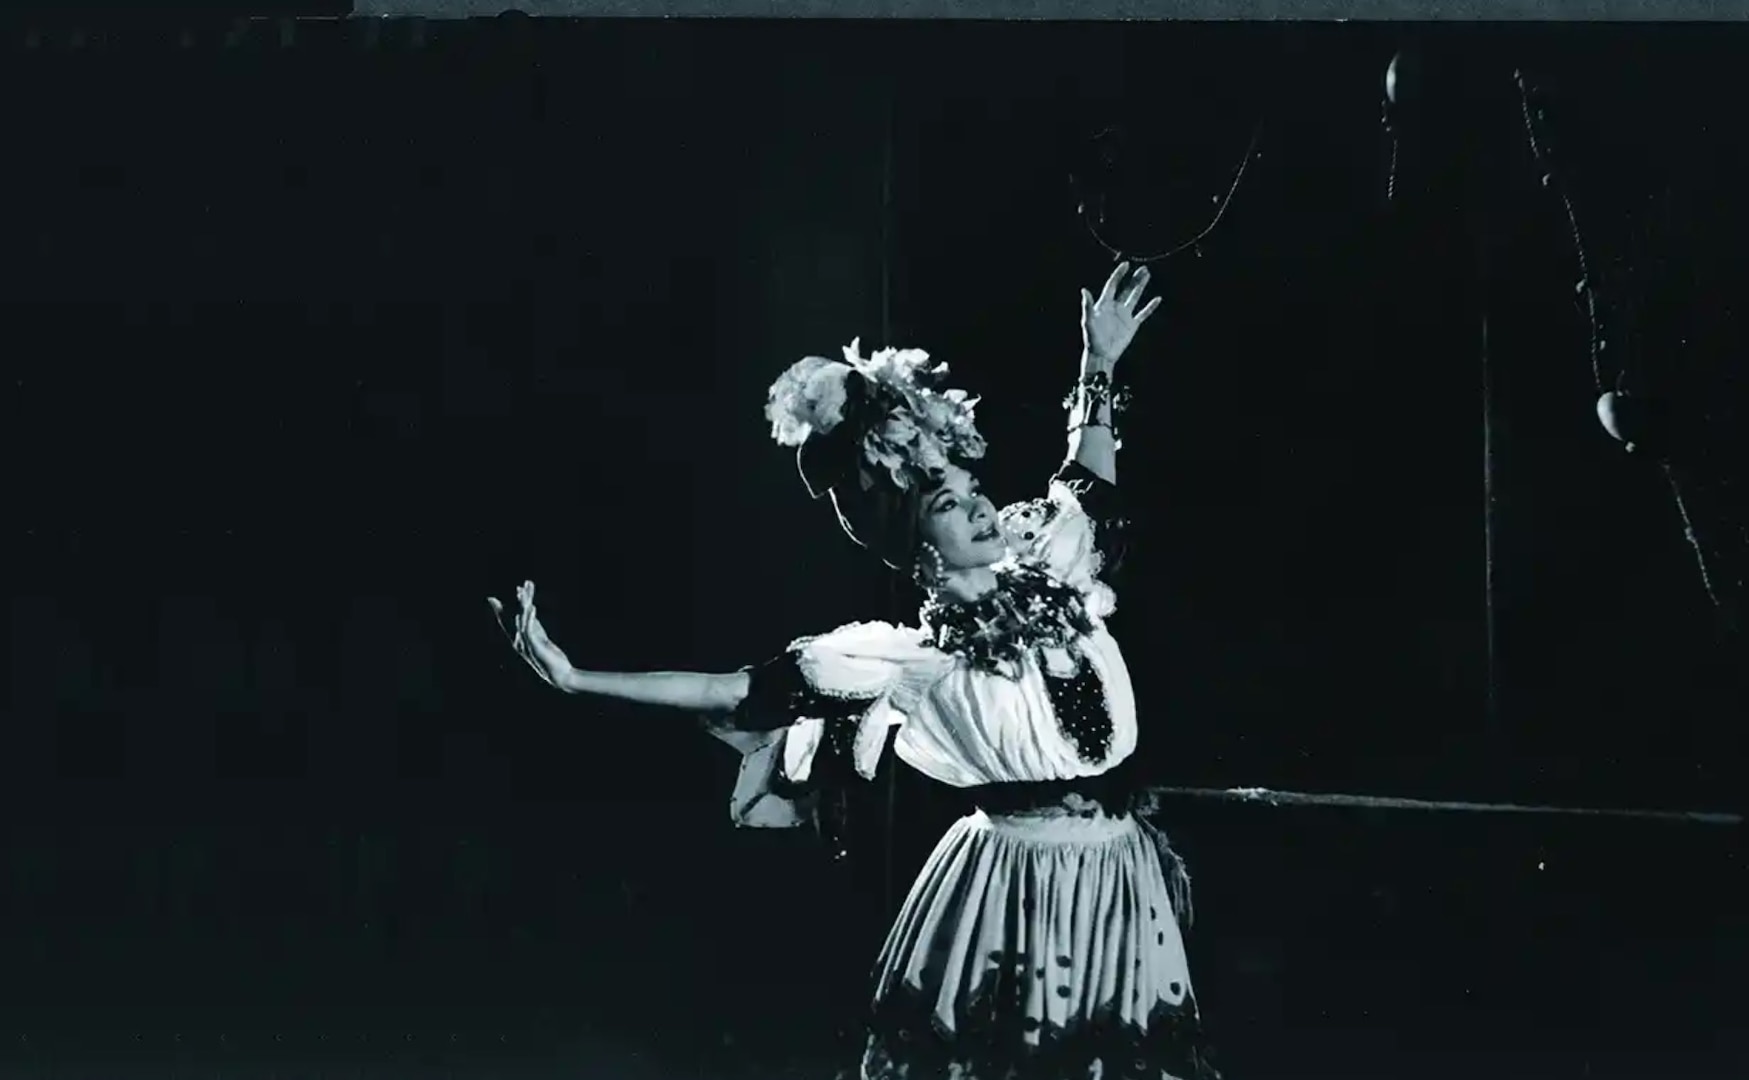 Katherine Dunham is a dancer that many historians have named the most important women of African American dance. She was considered both a dancer and an anthropologist. Dunham was one of the first modern dance pioneers, combining cultural, grounded dance movements with elements of ballet. (Photo by Roger Woods, courtesy of the New York Library digital collections.)